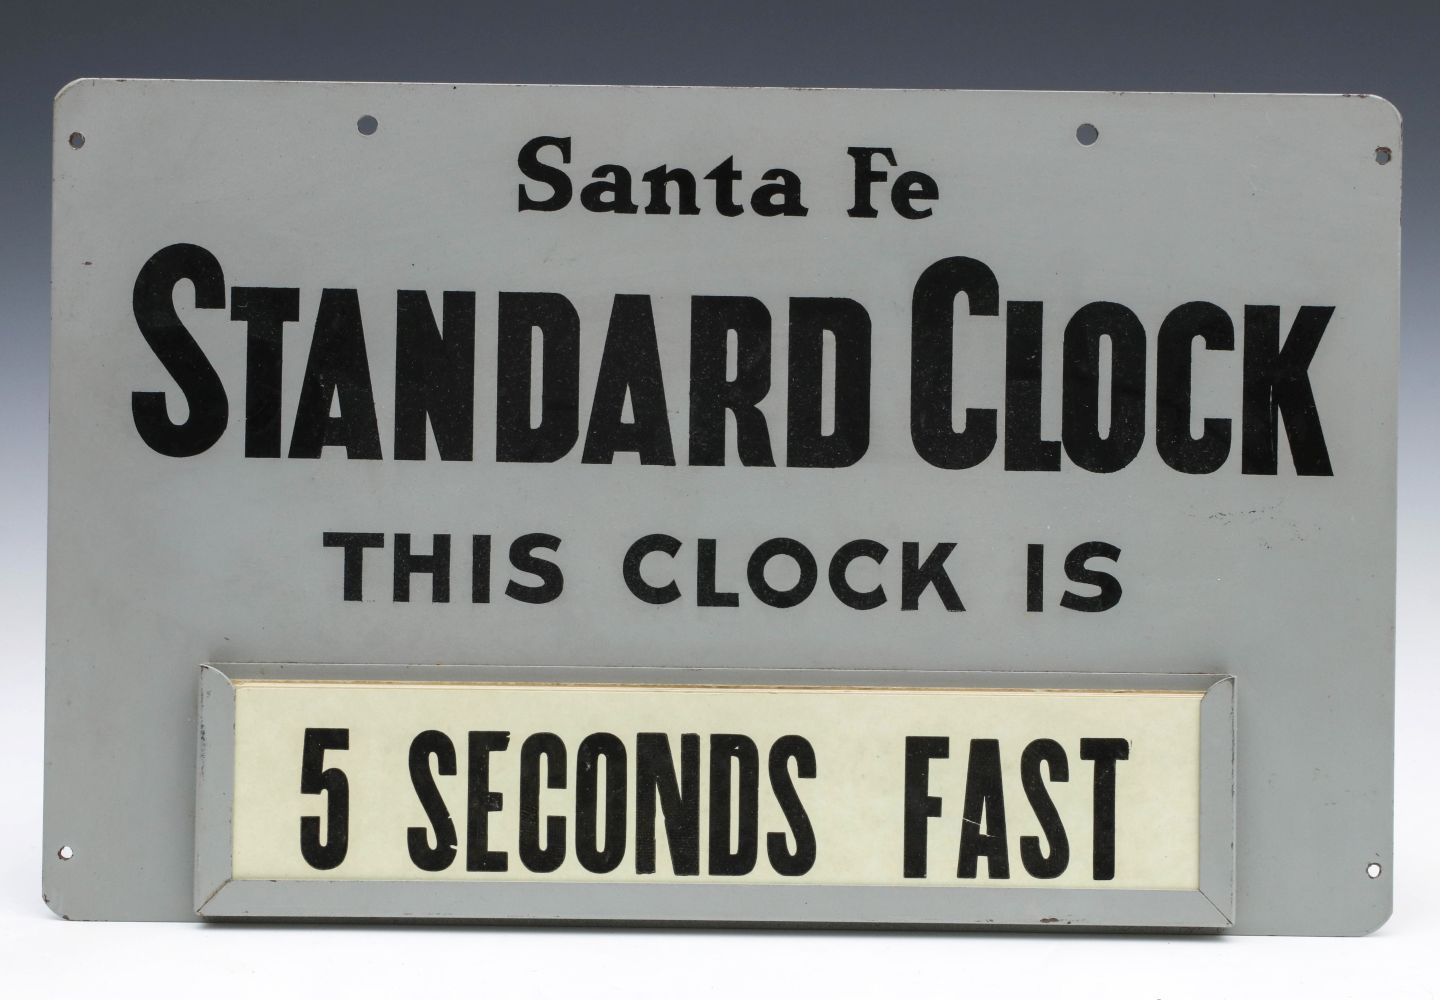 A SANTA FE 'STANDARD CLOCK' SIGN WITH ACCURACY PLACARDS